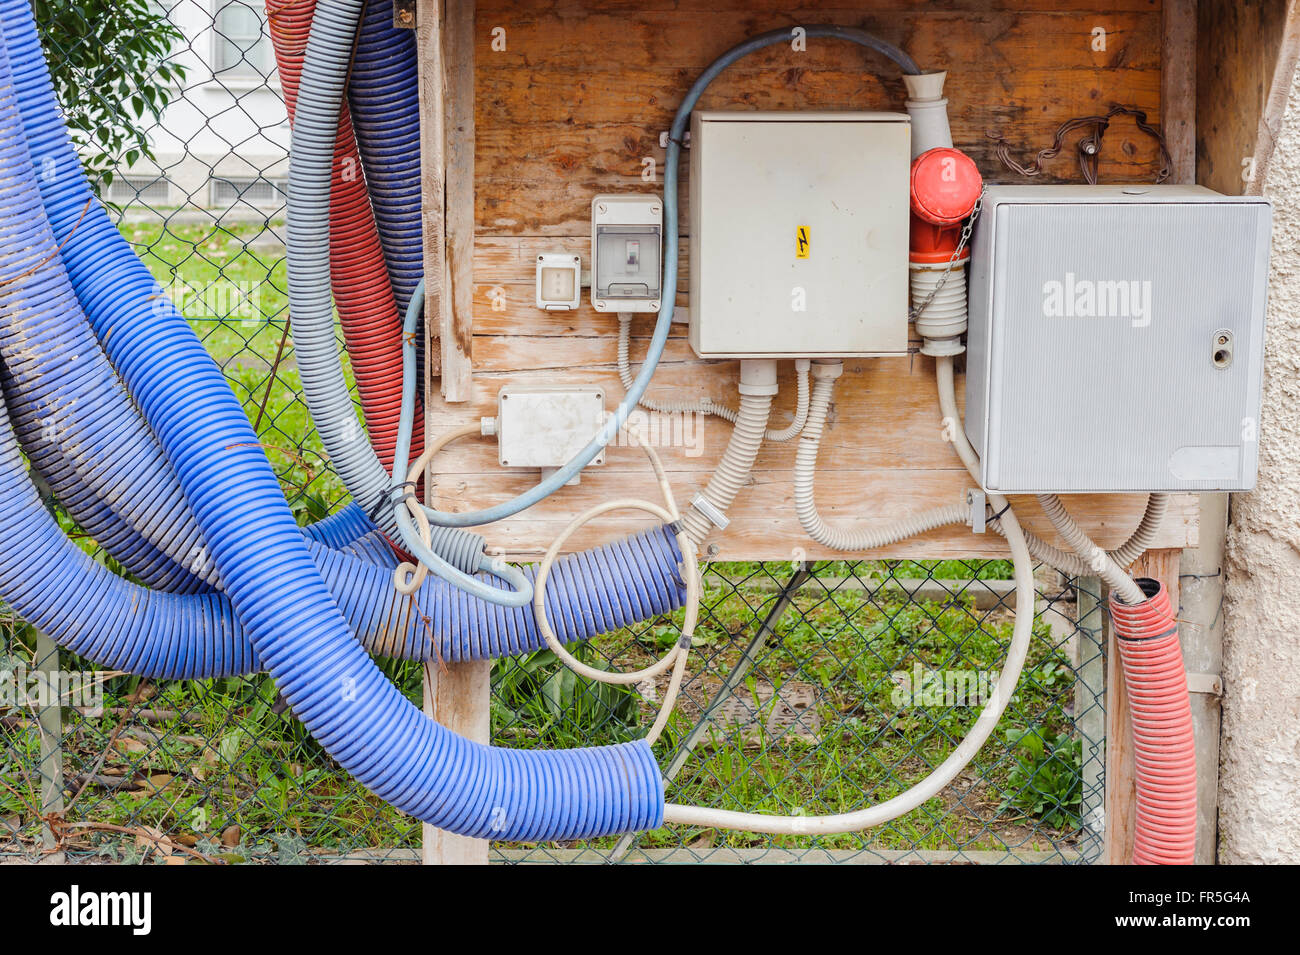 Temporary electrical panel and an electric meter for the work being done on the construction site. Stock Photo